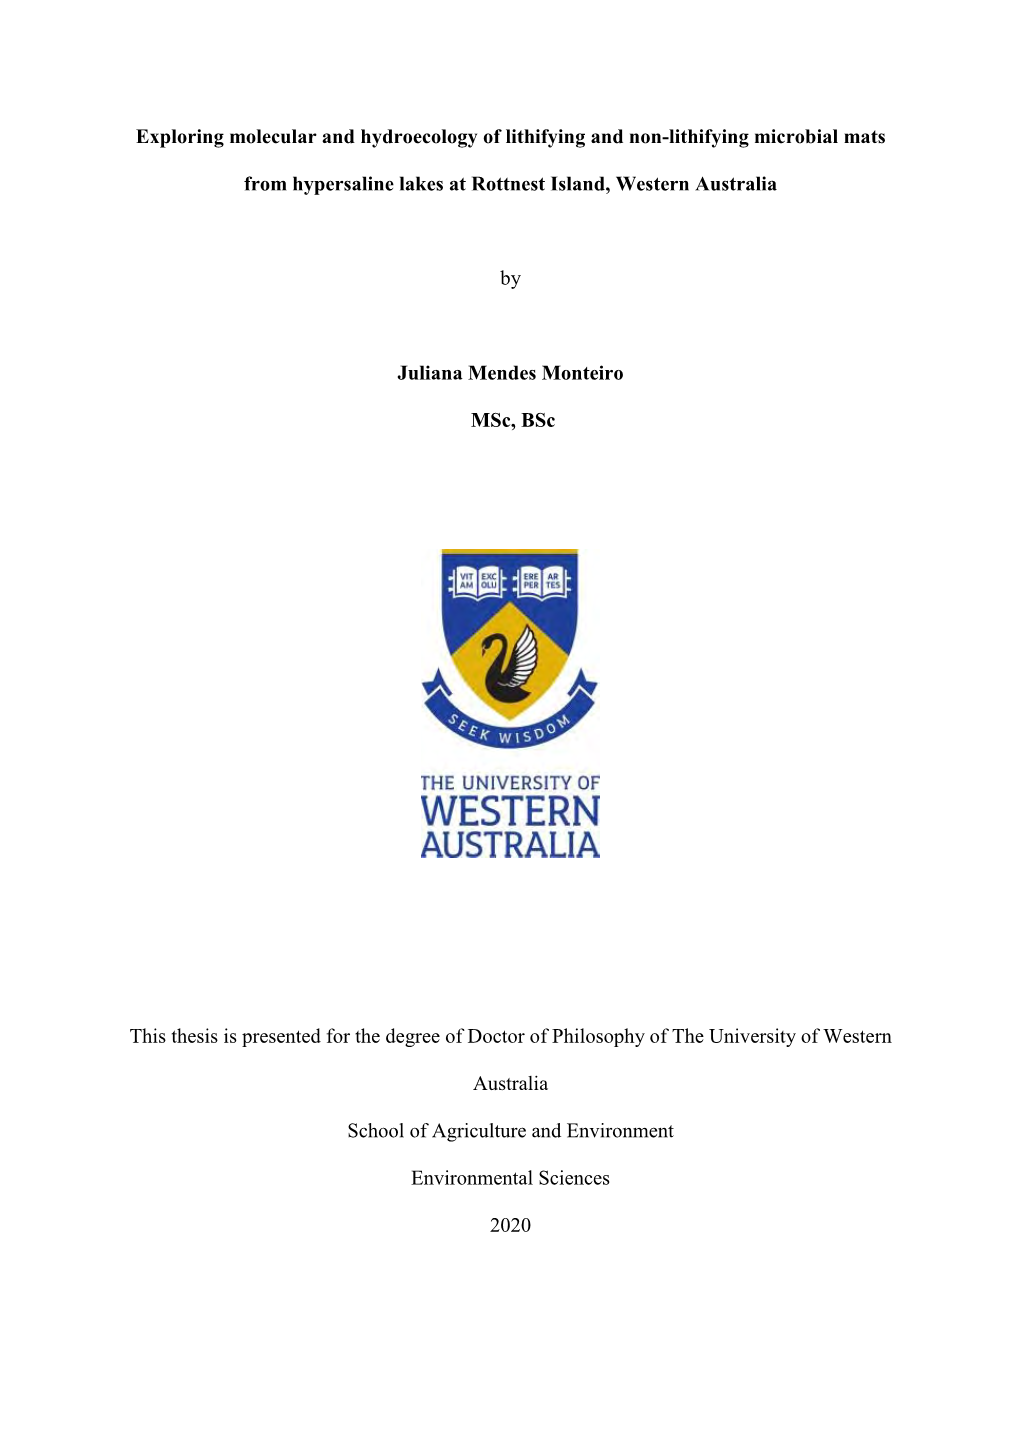 Thesis Is Presented for the Degree of Doctor of Philosophy of the University of Western